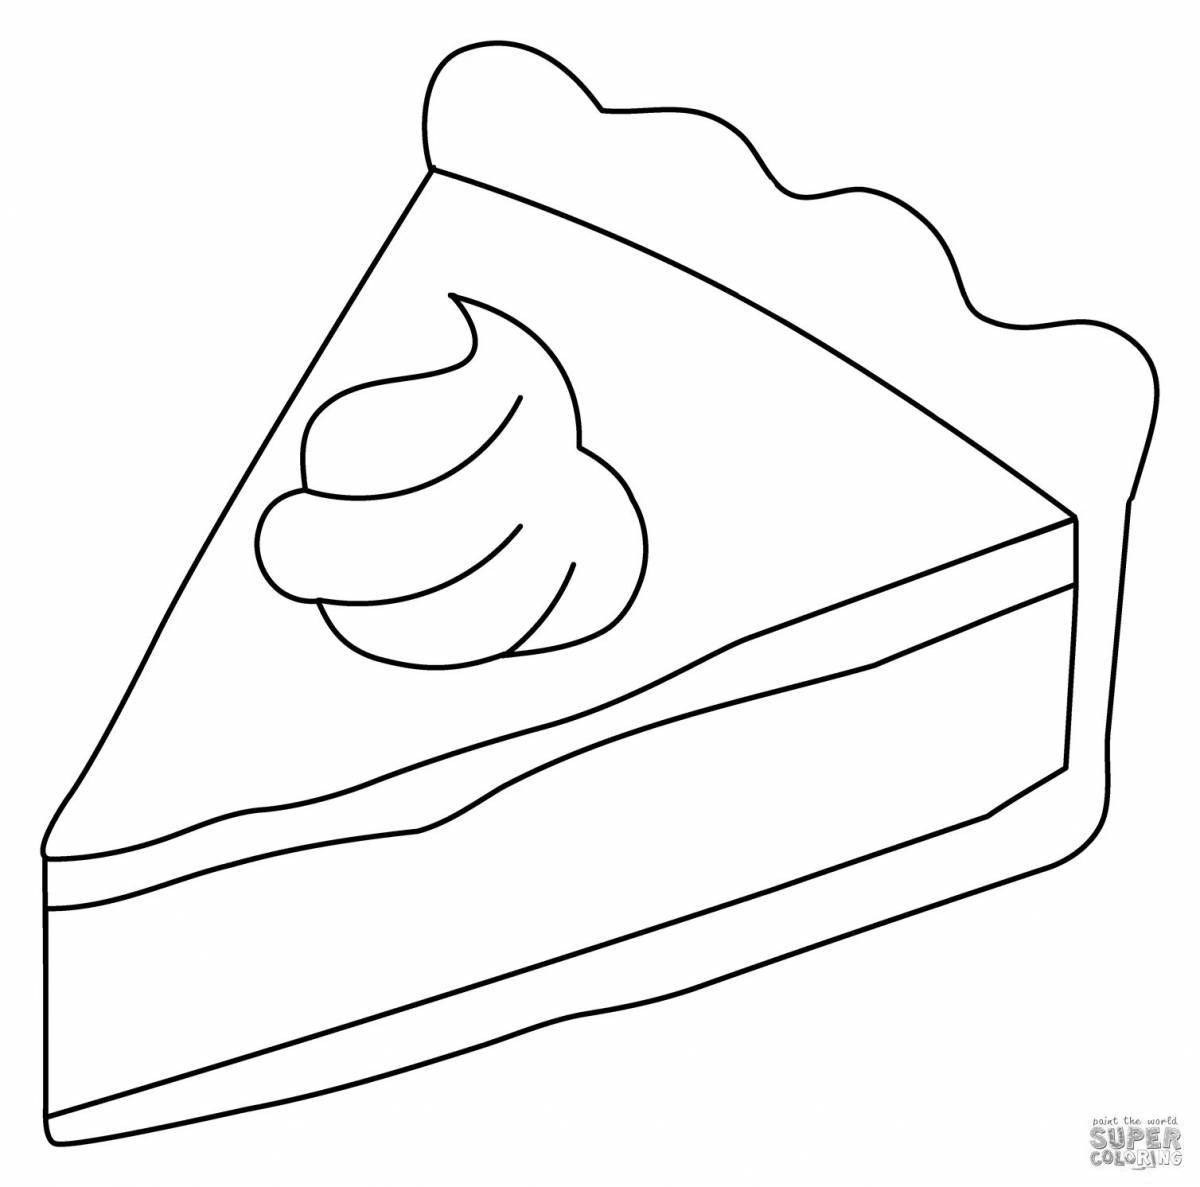 Shiny Pie Coloring Page for Toddlers